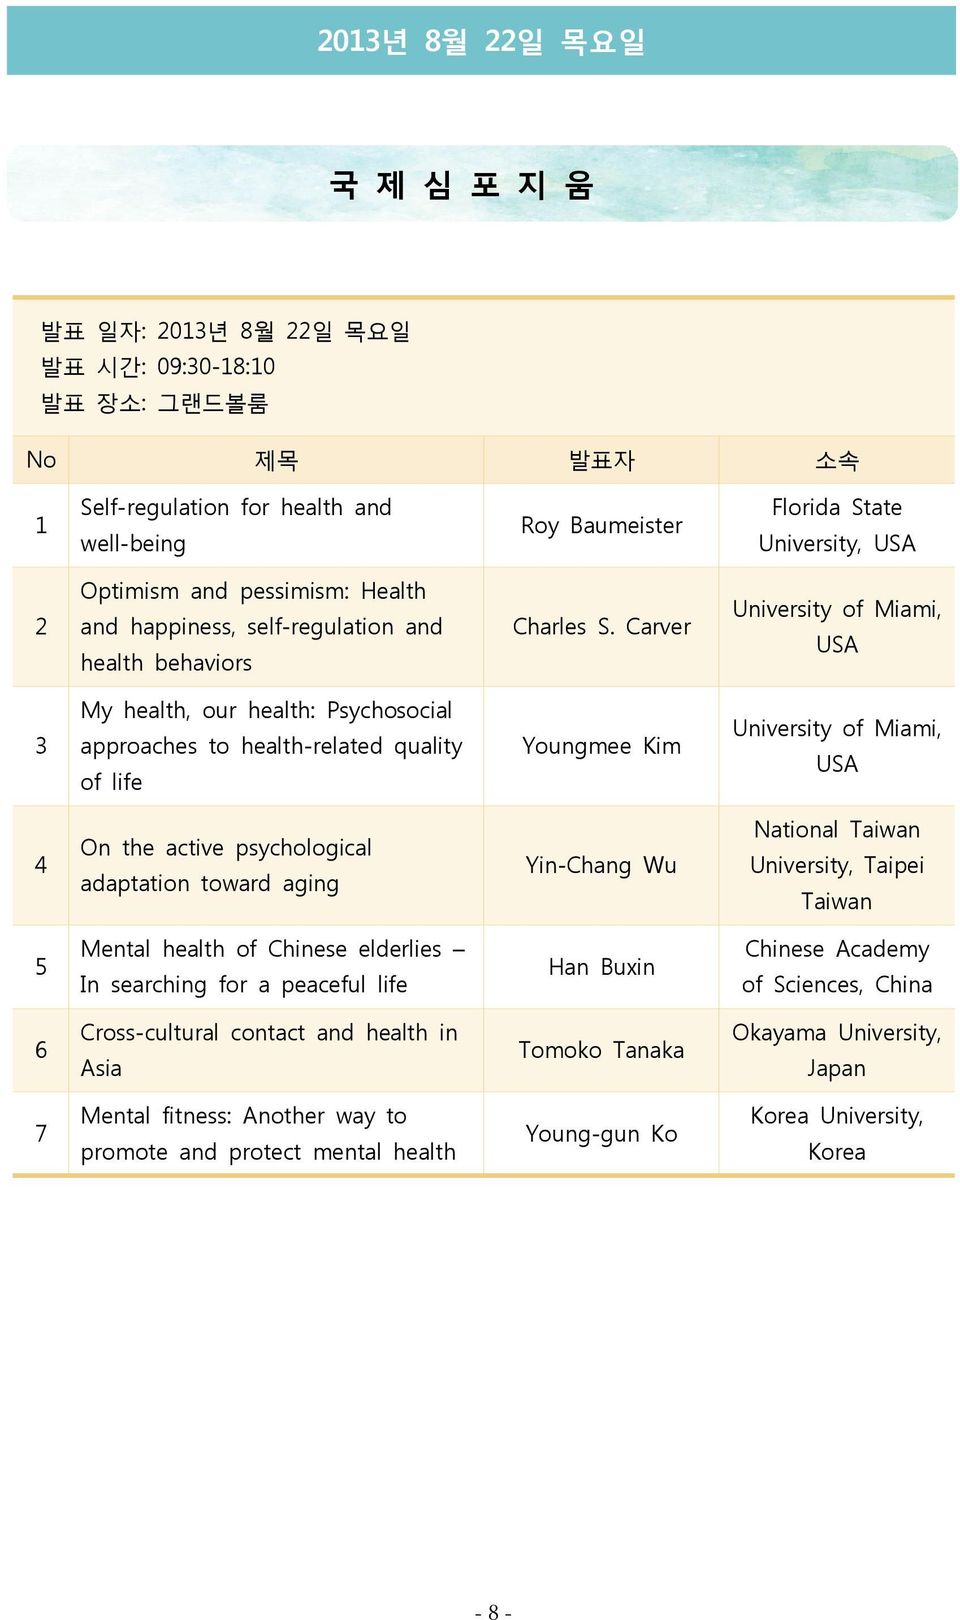 Carver University of Miami, USA 3 My health, our health: Psychosocial approaches to health-related quality of life Youngmee Kim University of Miami, USA 4 On the active psychological adaptation